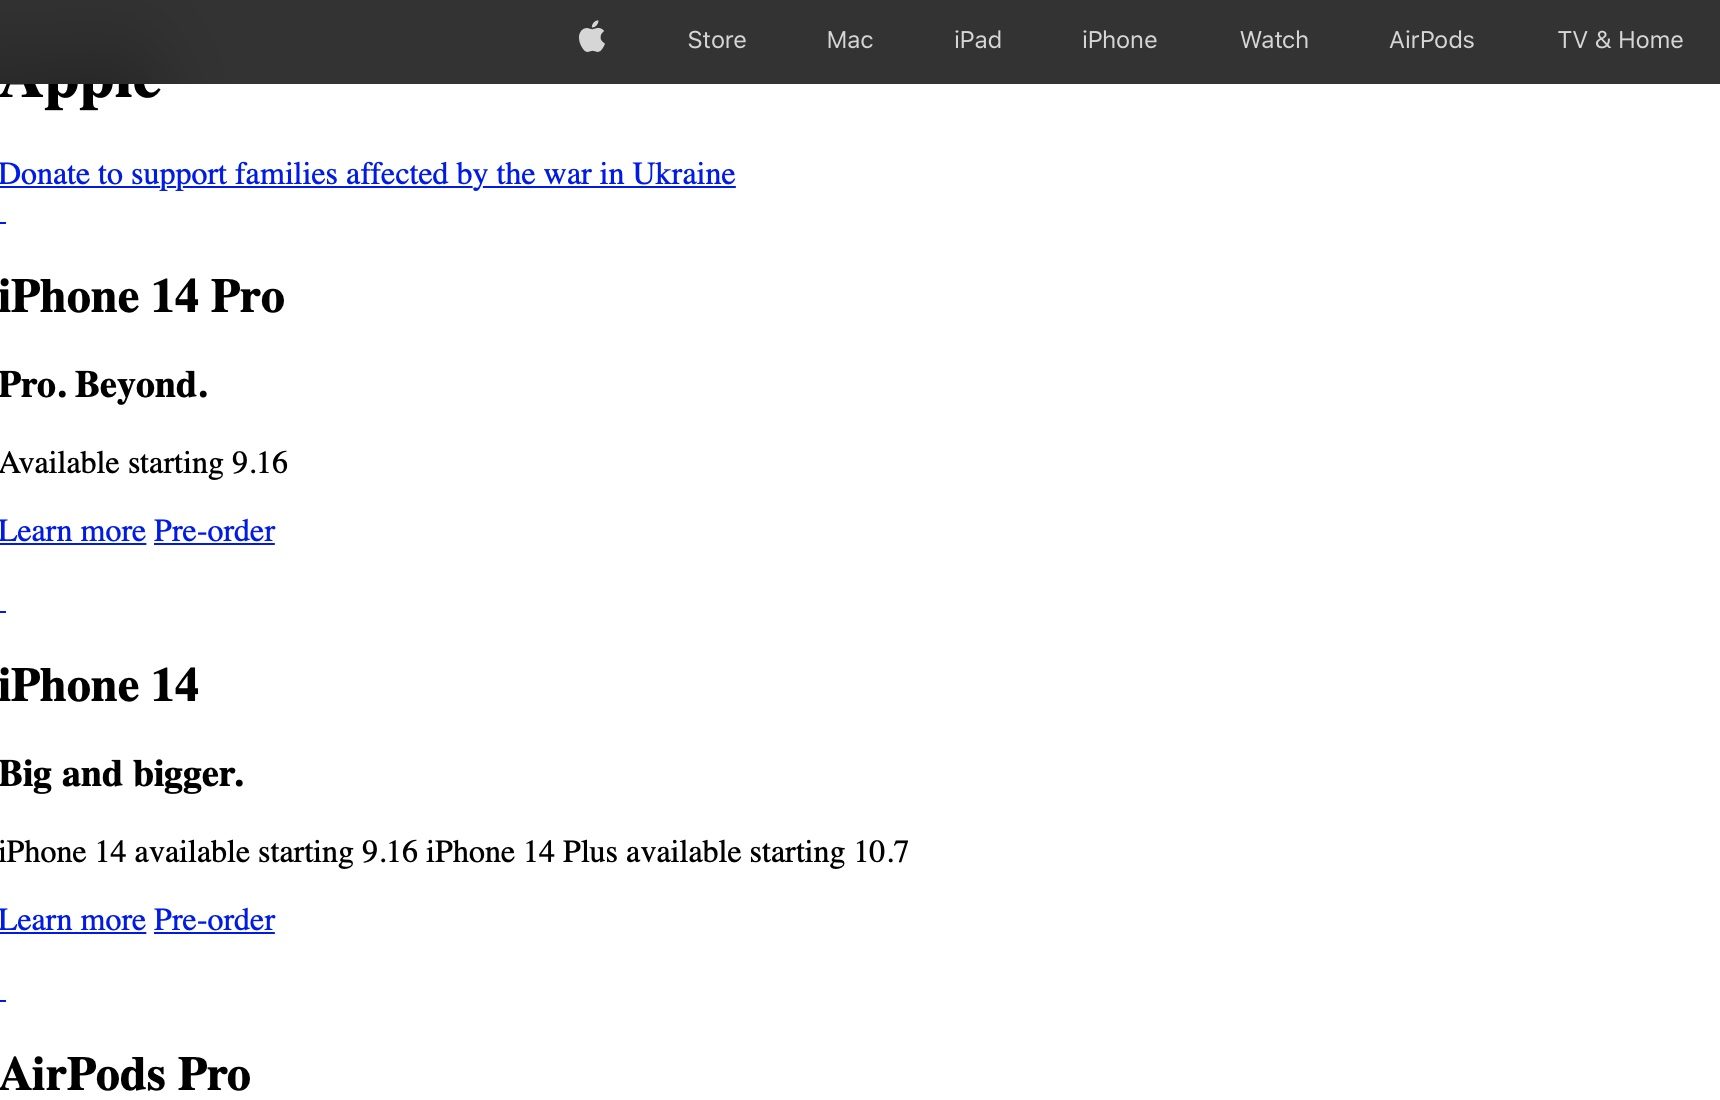 Apple’s Website is Currently Experiencing Issues